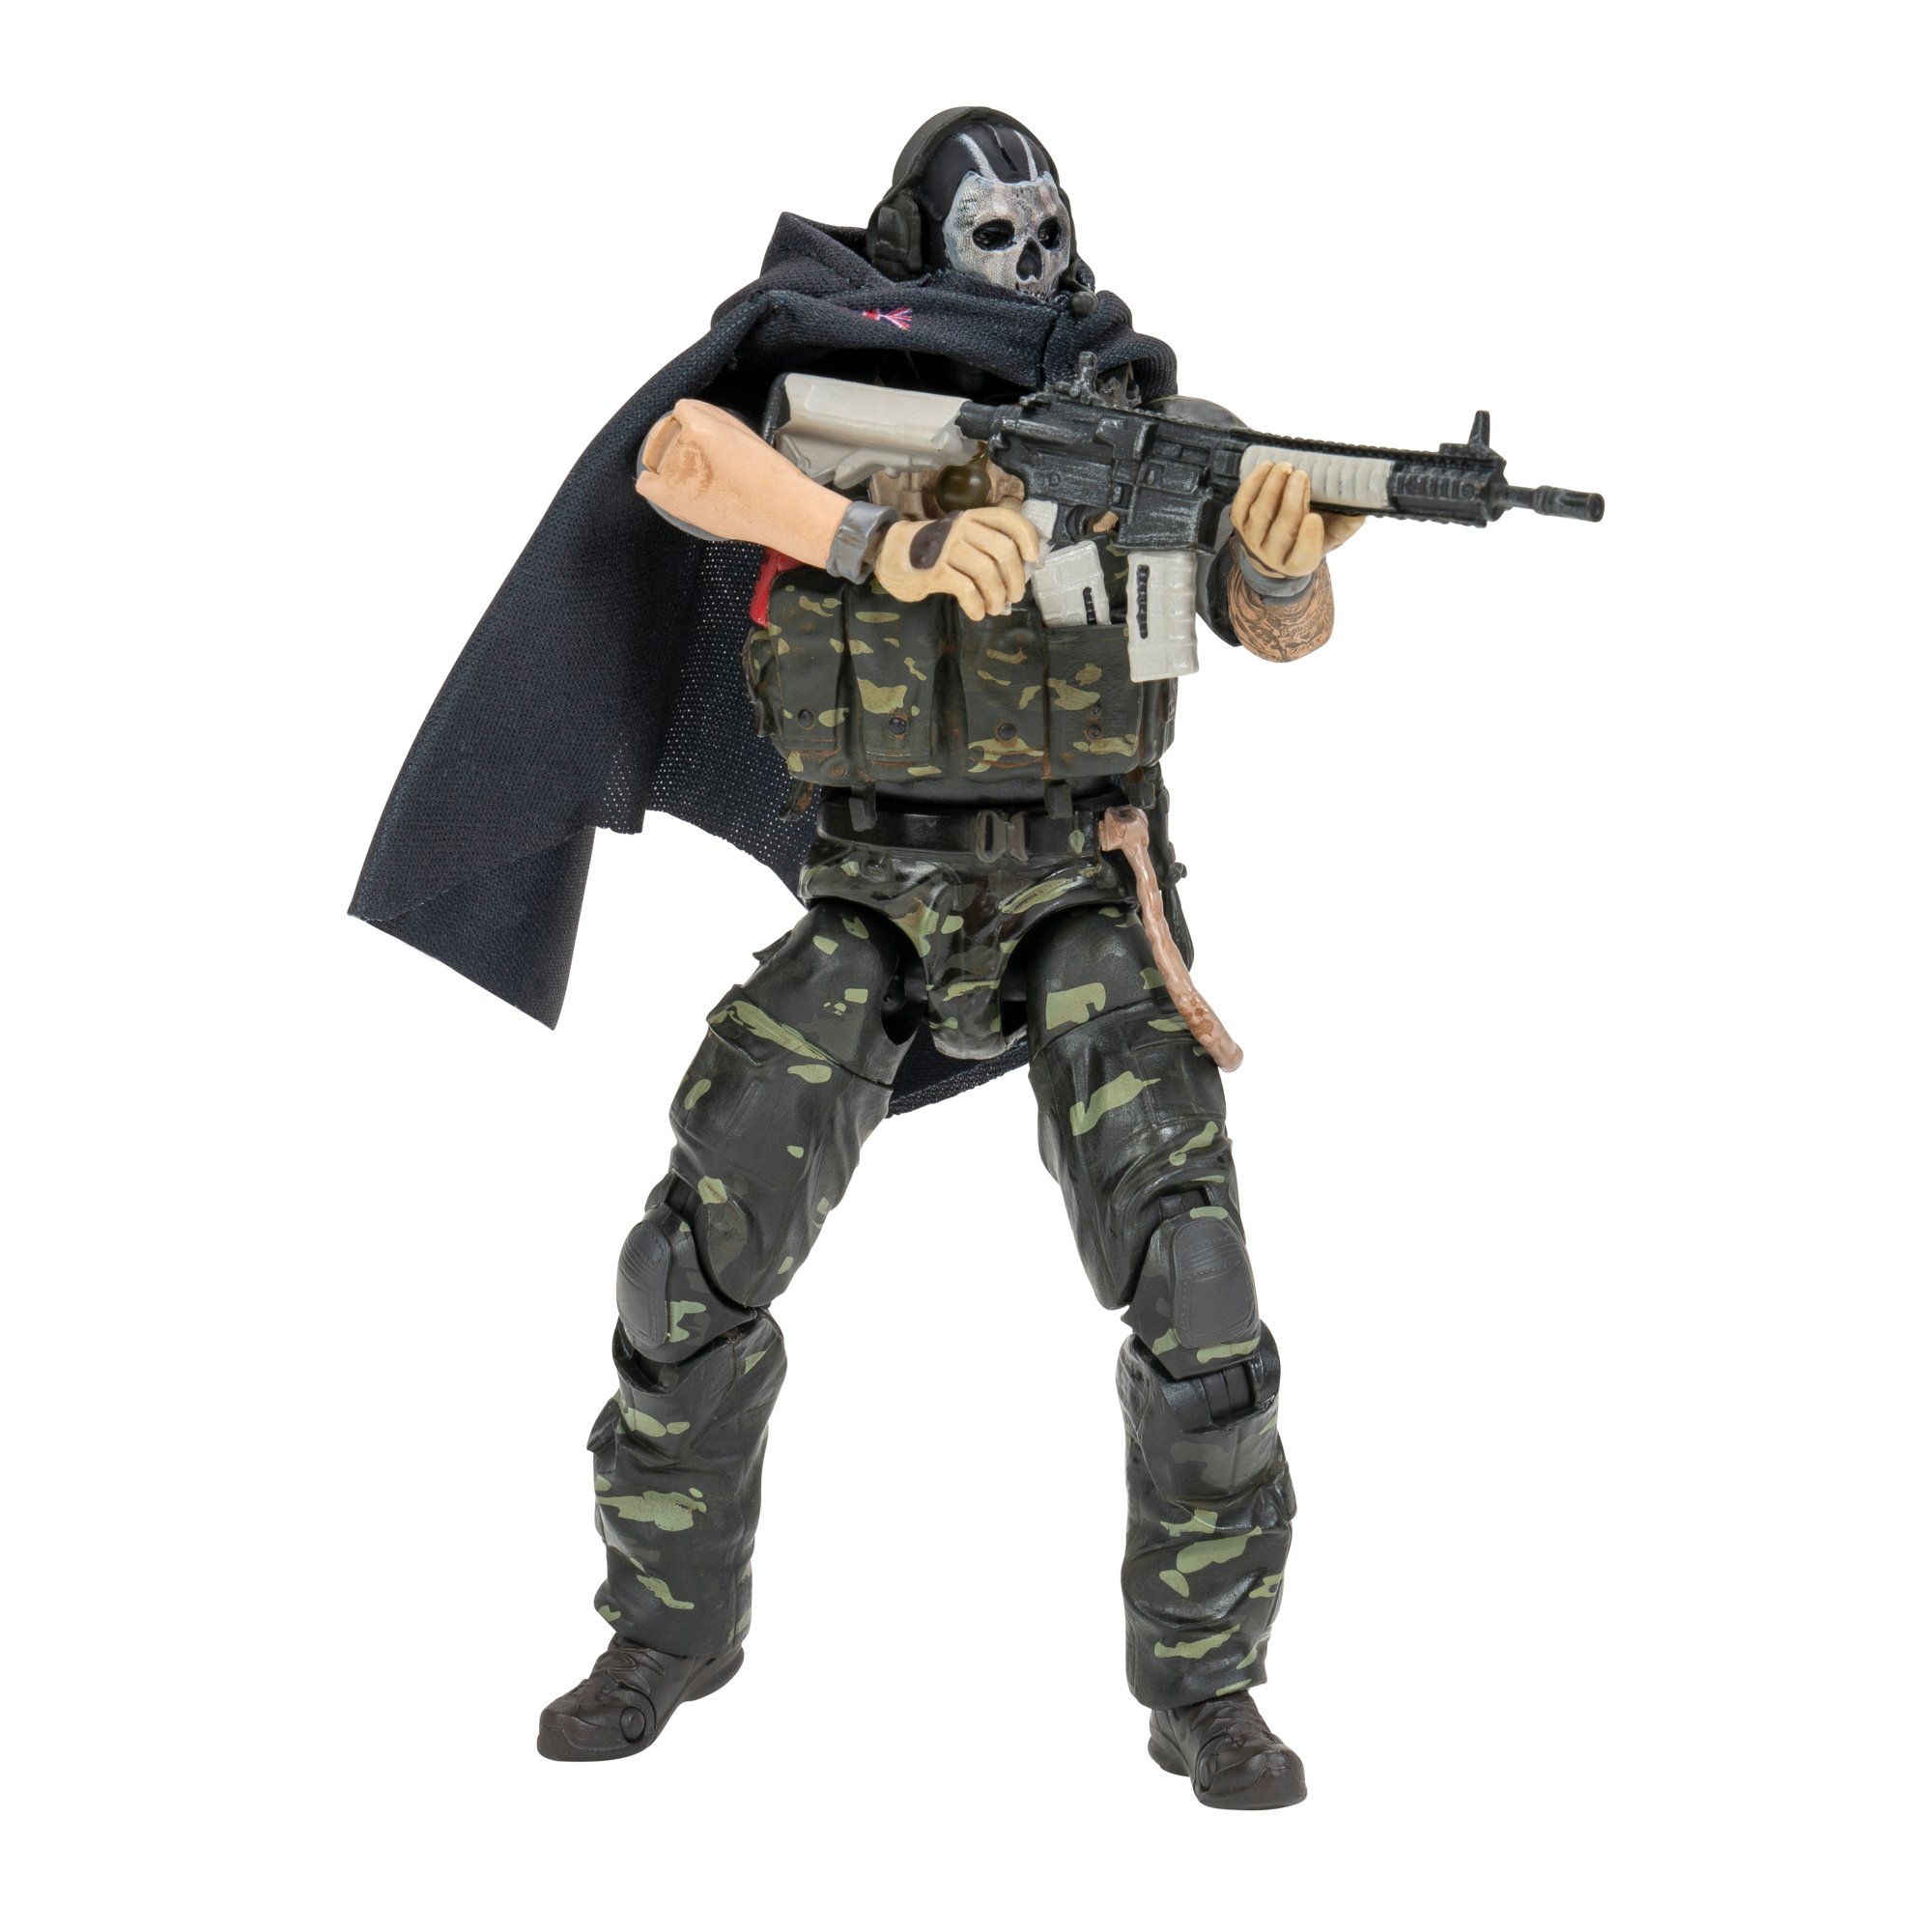 SDCC 2023: Jazwares Launches 'Call of Duty' Collection